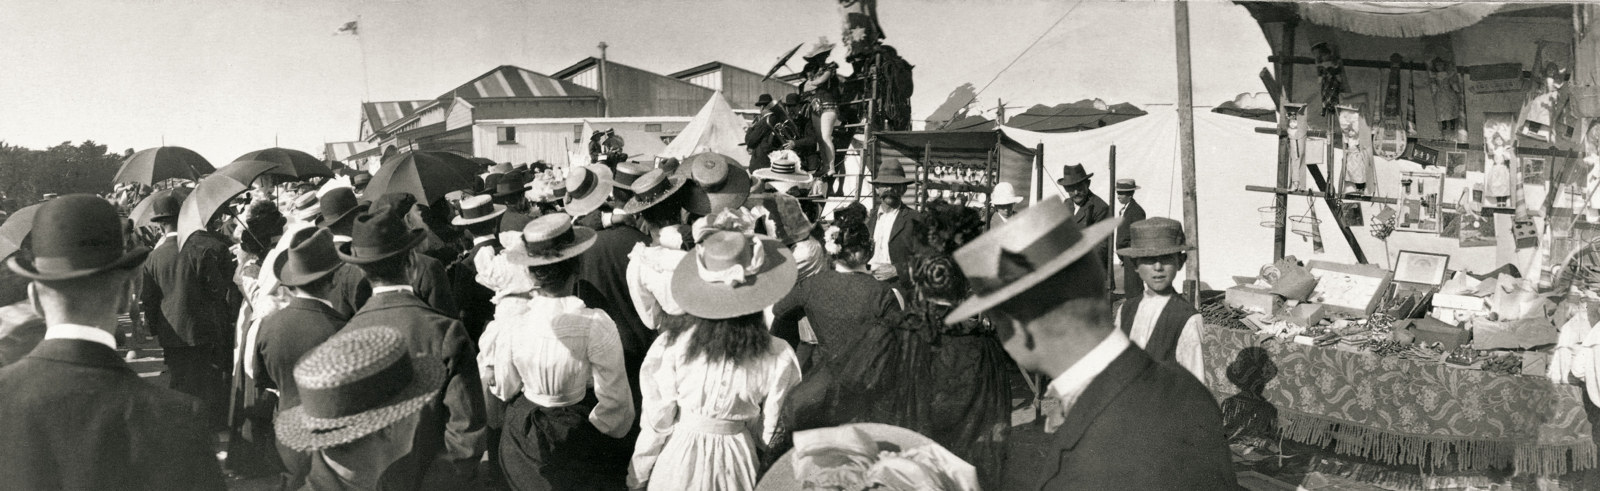 a panoramic image of crowds at a side show. Young girl with long hair and hat is in the foreground. An unclear attraction is on a stage is in the background.